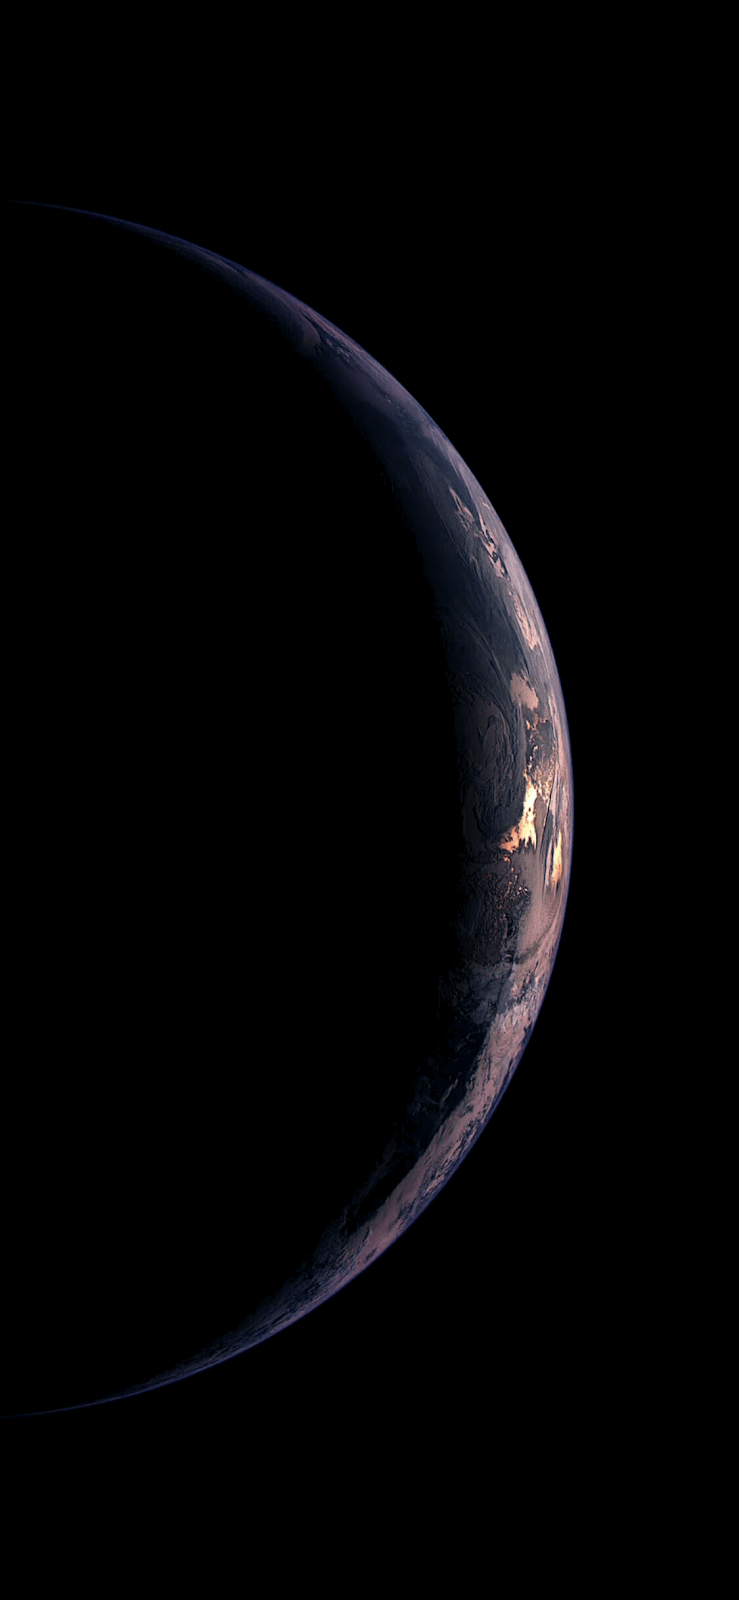 Earth For IPhone X XS ( For Amoled Display). IPhone Wallpaper